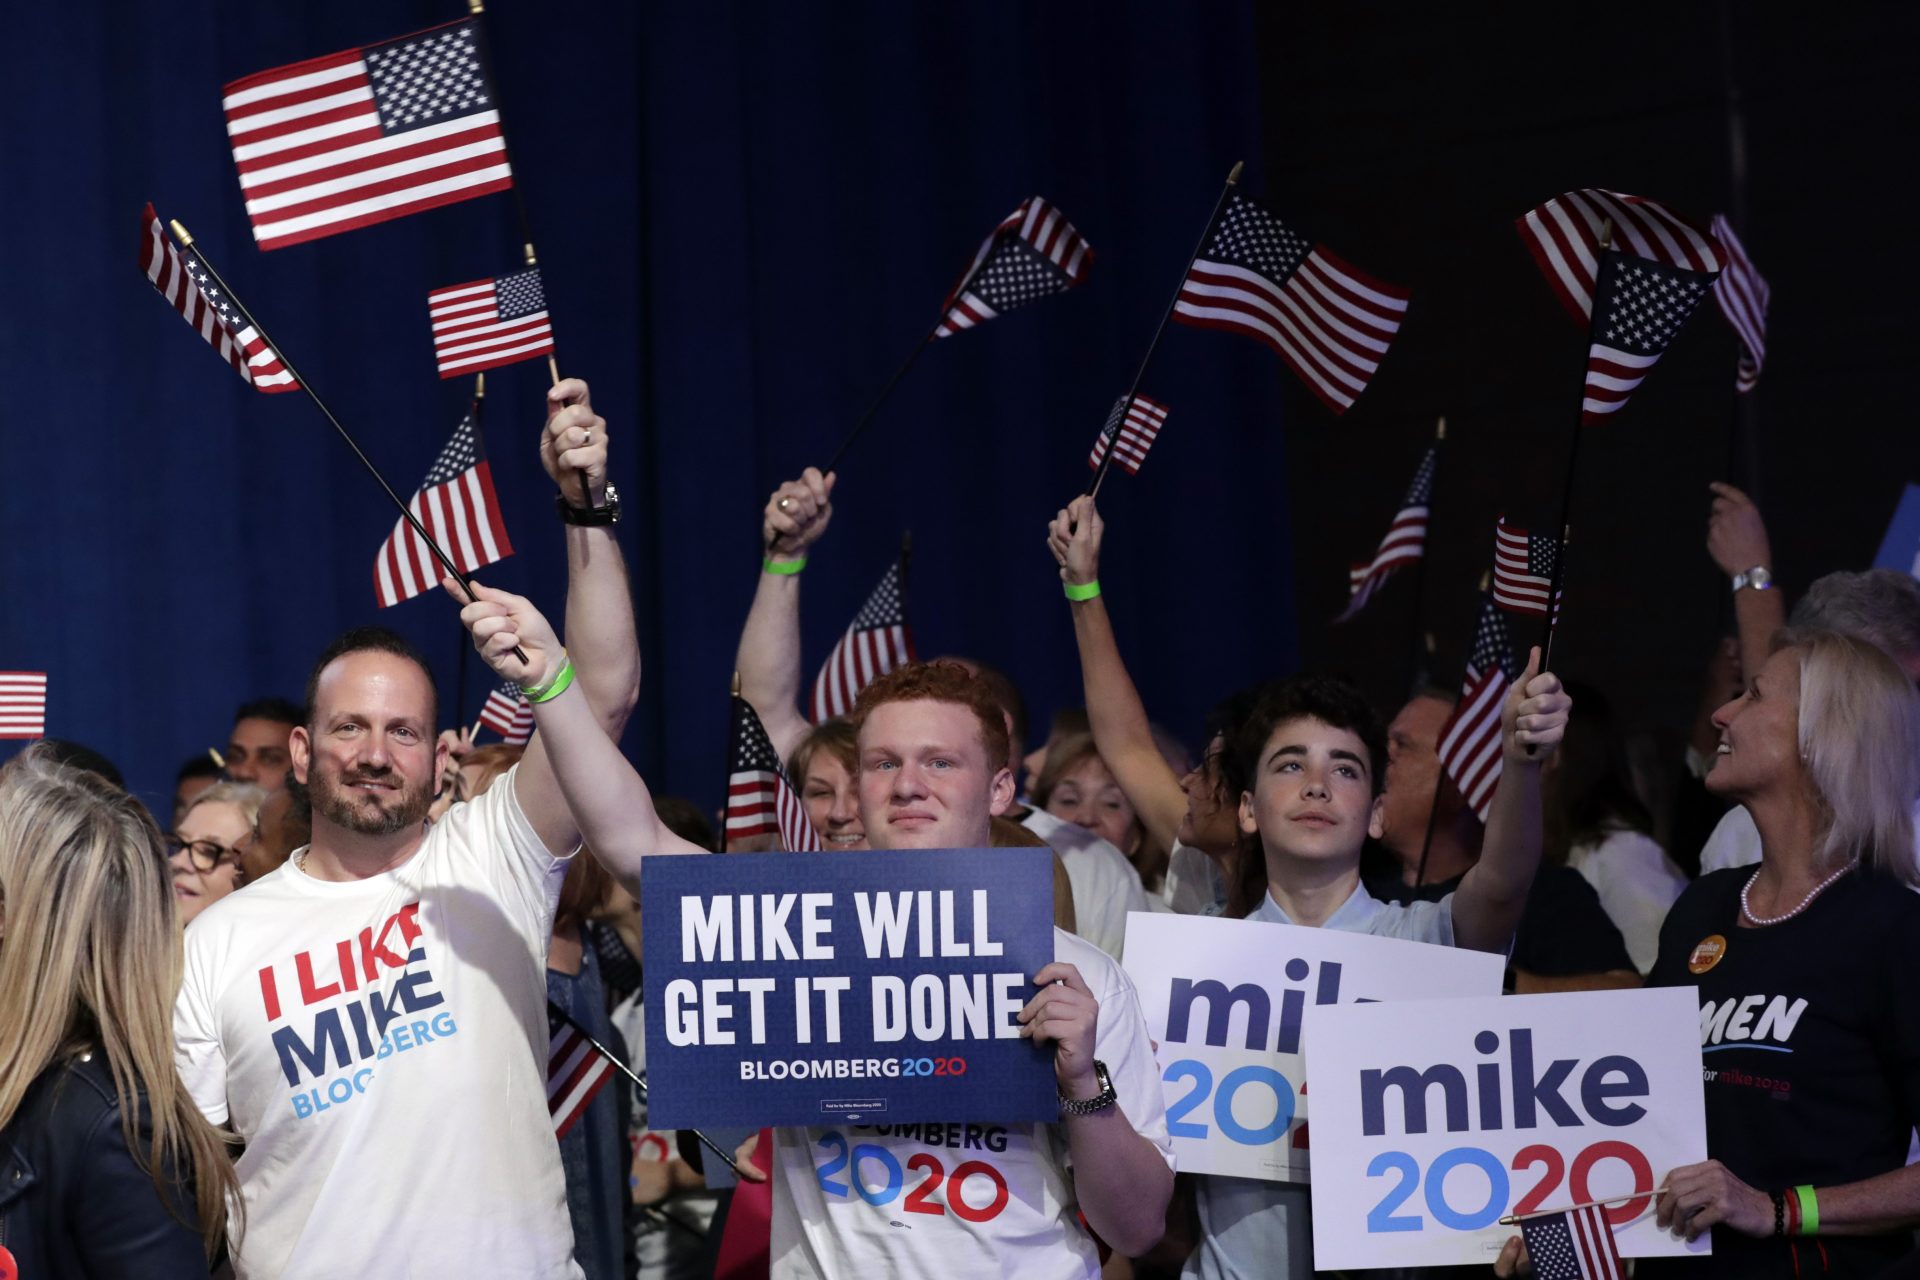 Supporters of Democratic presidential candidate former New York City Mayor Mike Bloomberg attend a primary election night campaign rally Tuesday, March 3, 2020, in West Palm Beach, Fla.